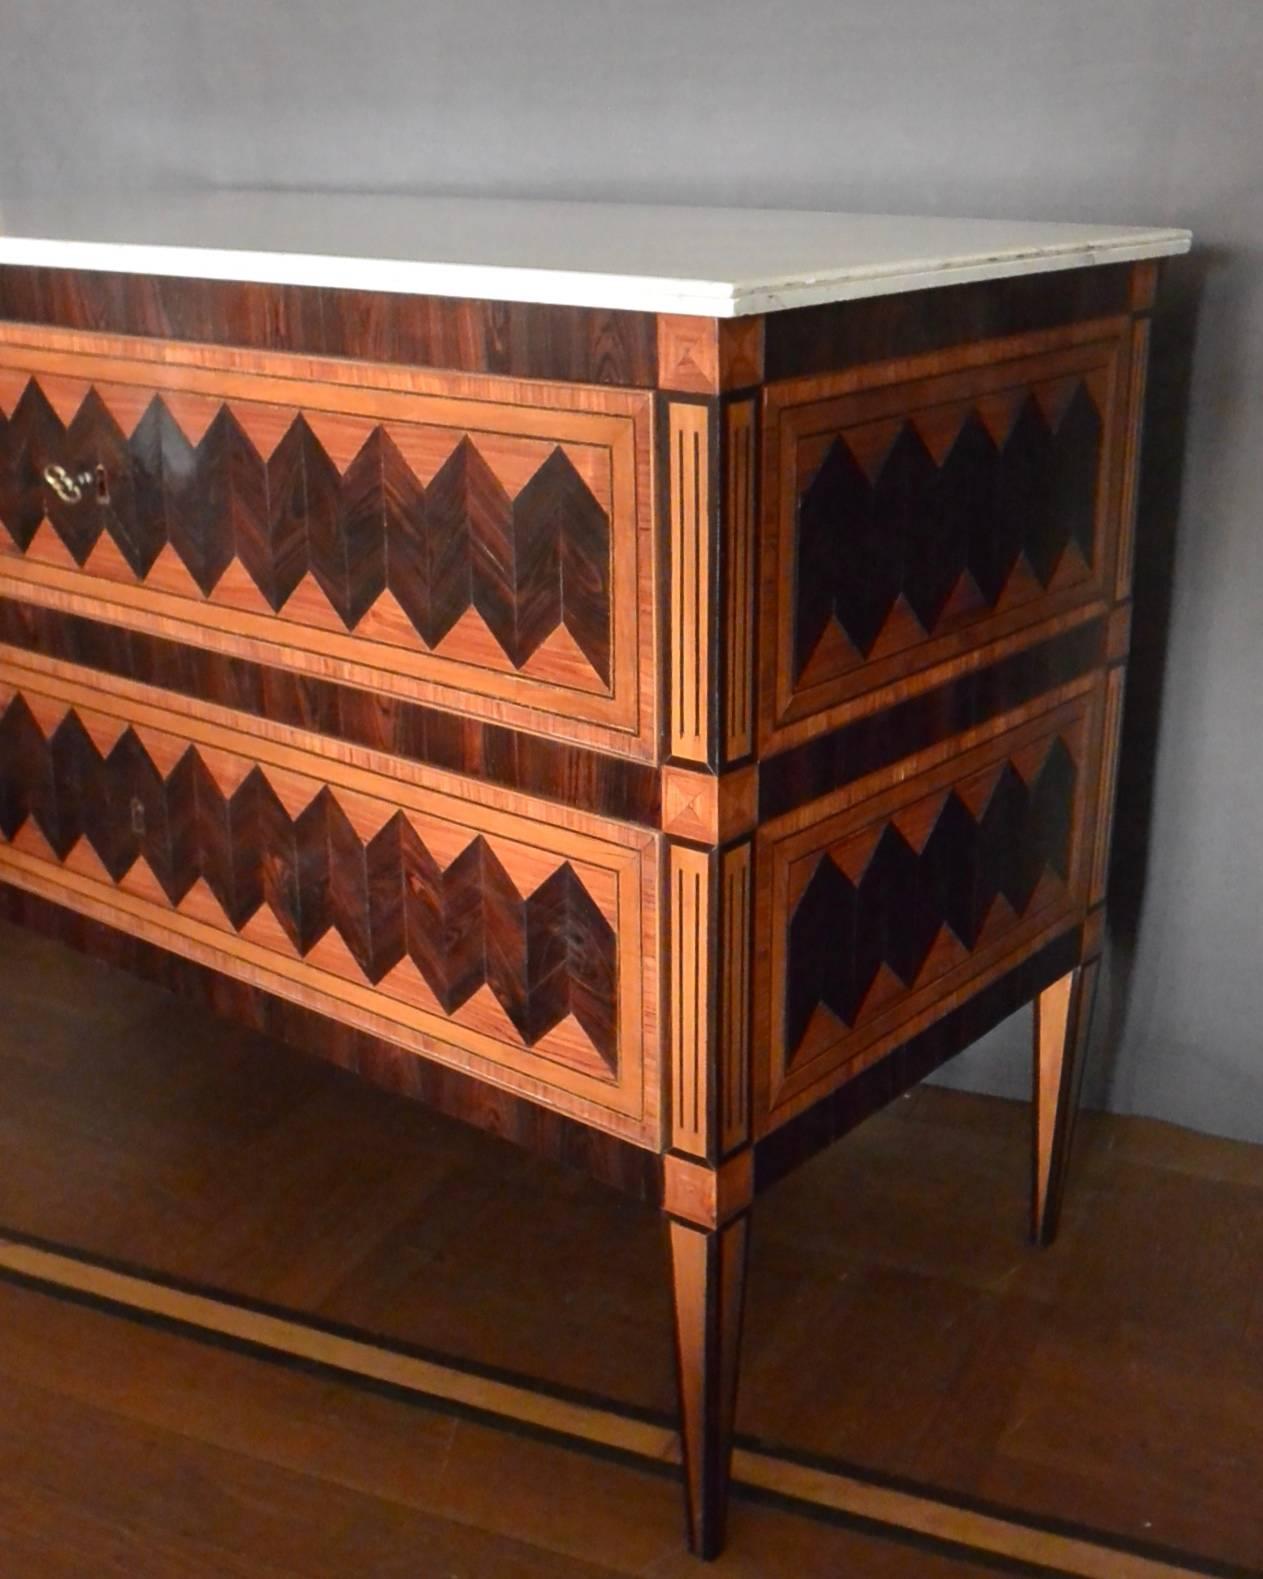 Italian Louis XVI period chest of drawers in modern and bold geometric ebony marquetry inlay with white marble top; newly restored. Naples, late 18th century. 
Dimensions: 50.25